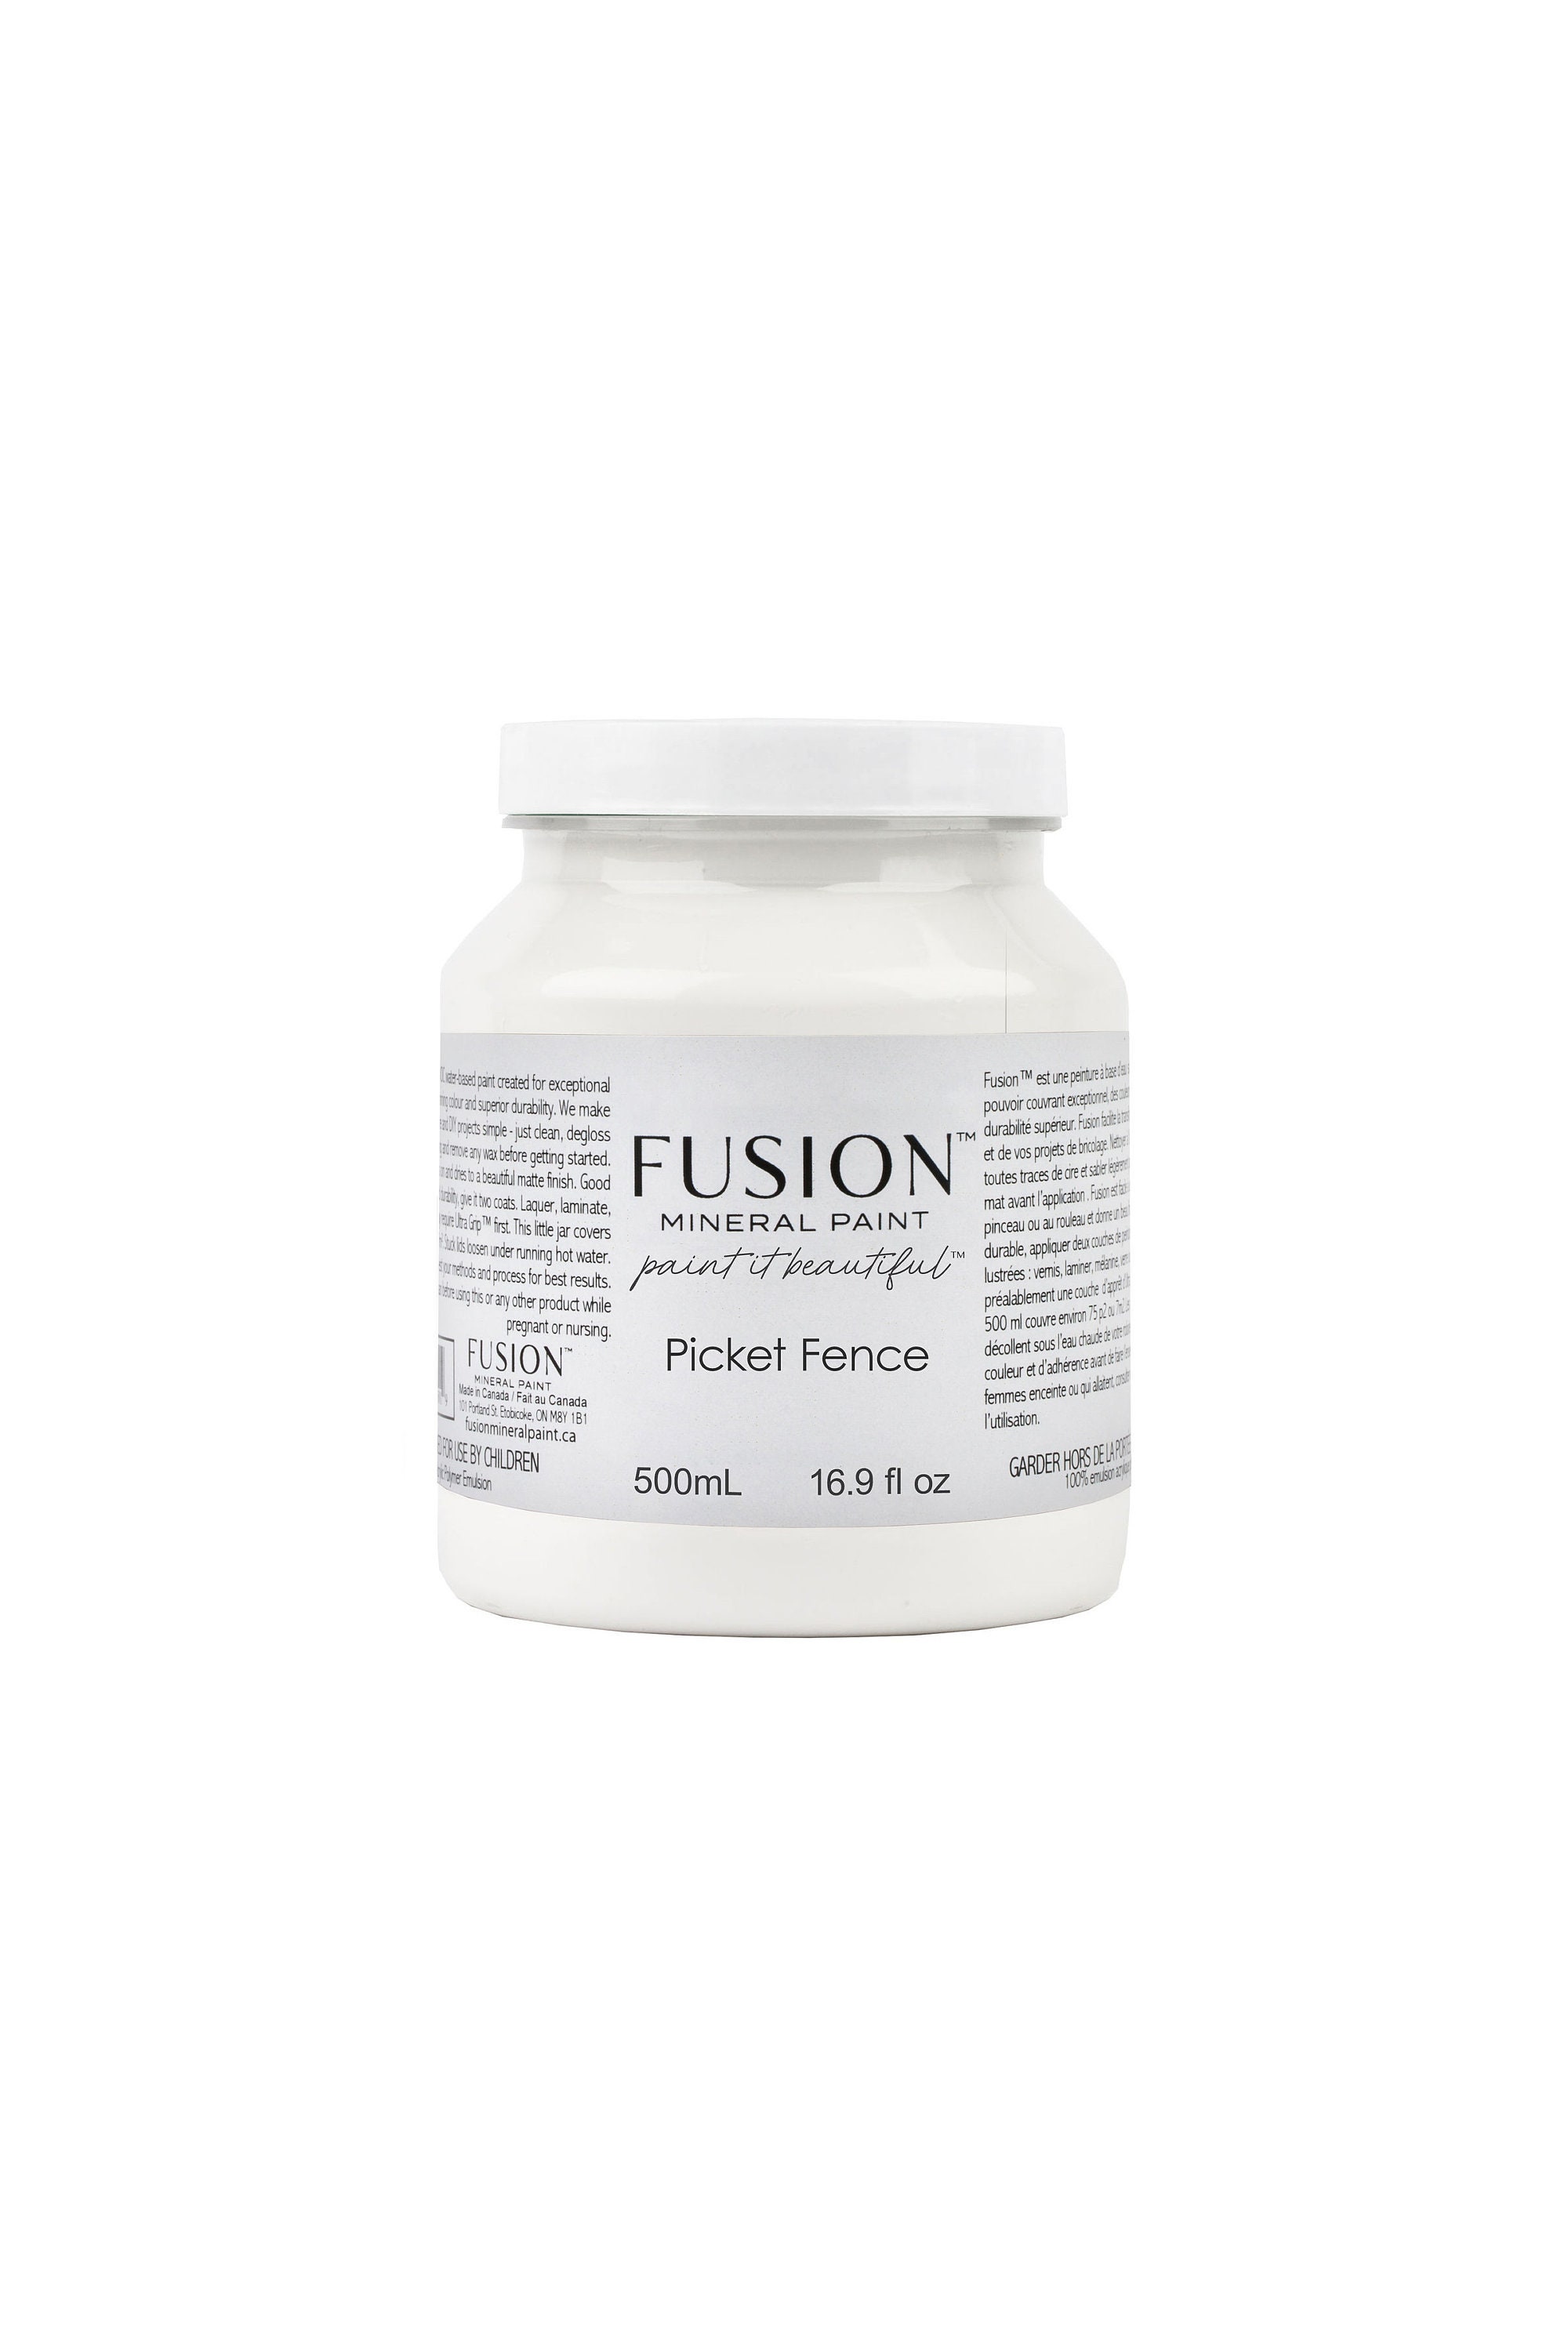 Fusion Mineral Paint Picket Fence Pint Furniture Paint